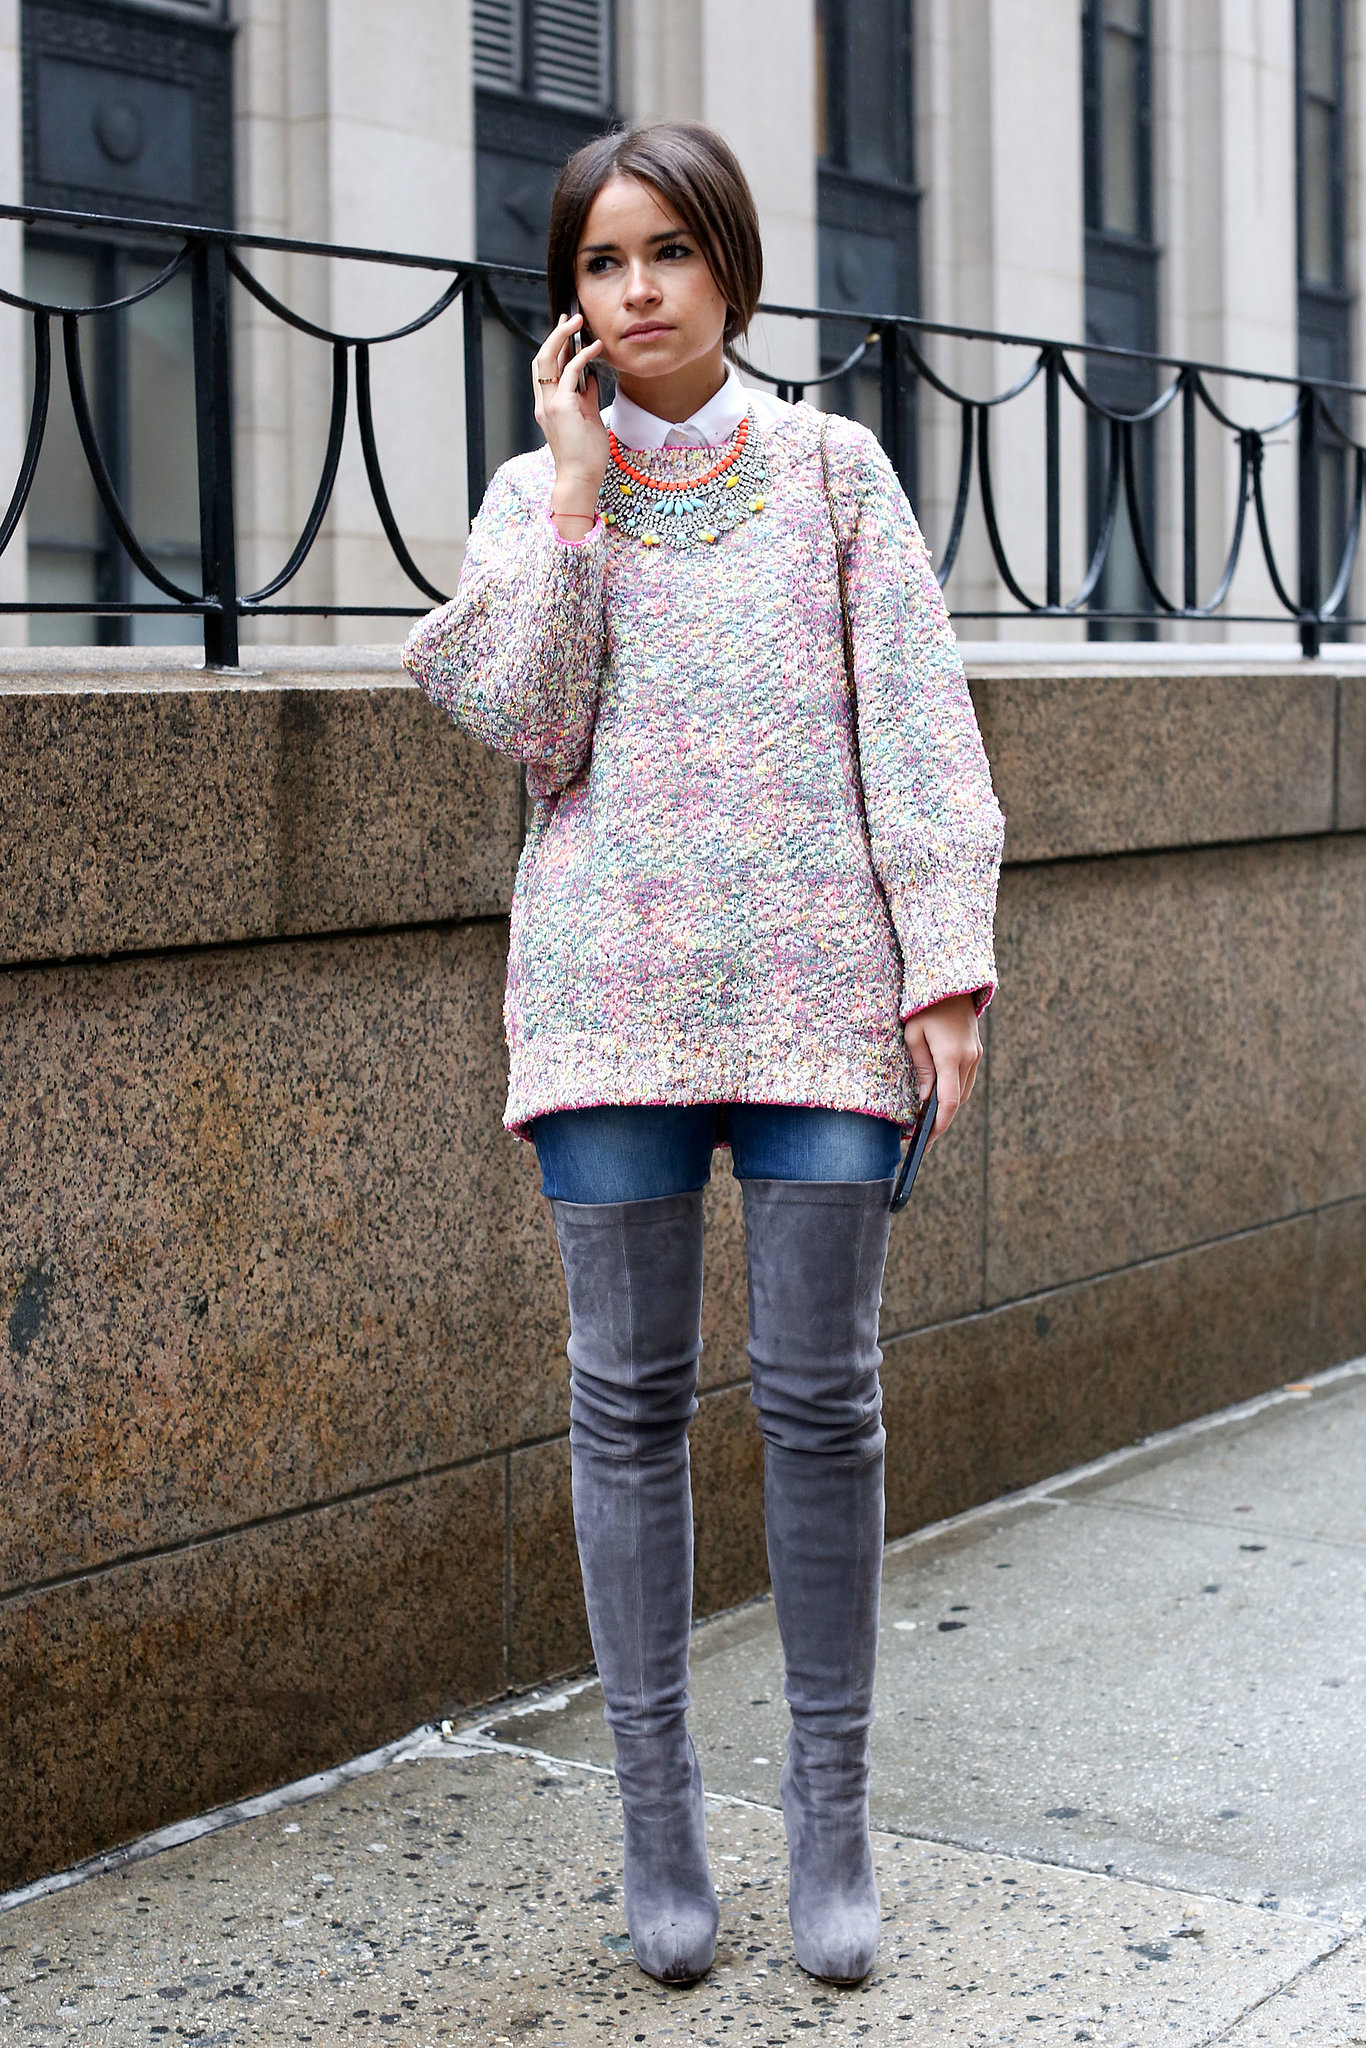 Miroslava Duma added some serious wow factor to a soft sweater with over-the-knee boots.
